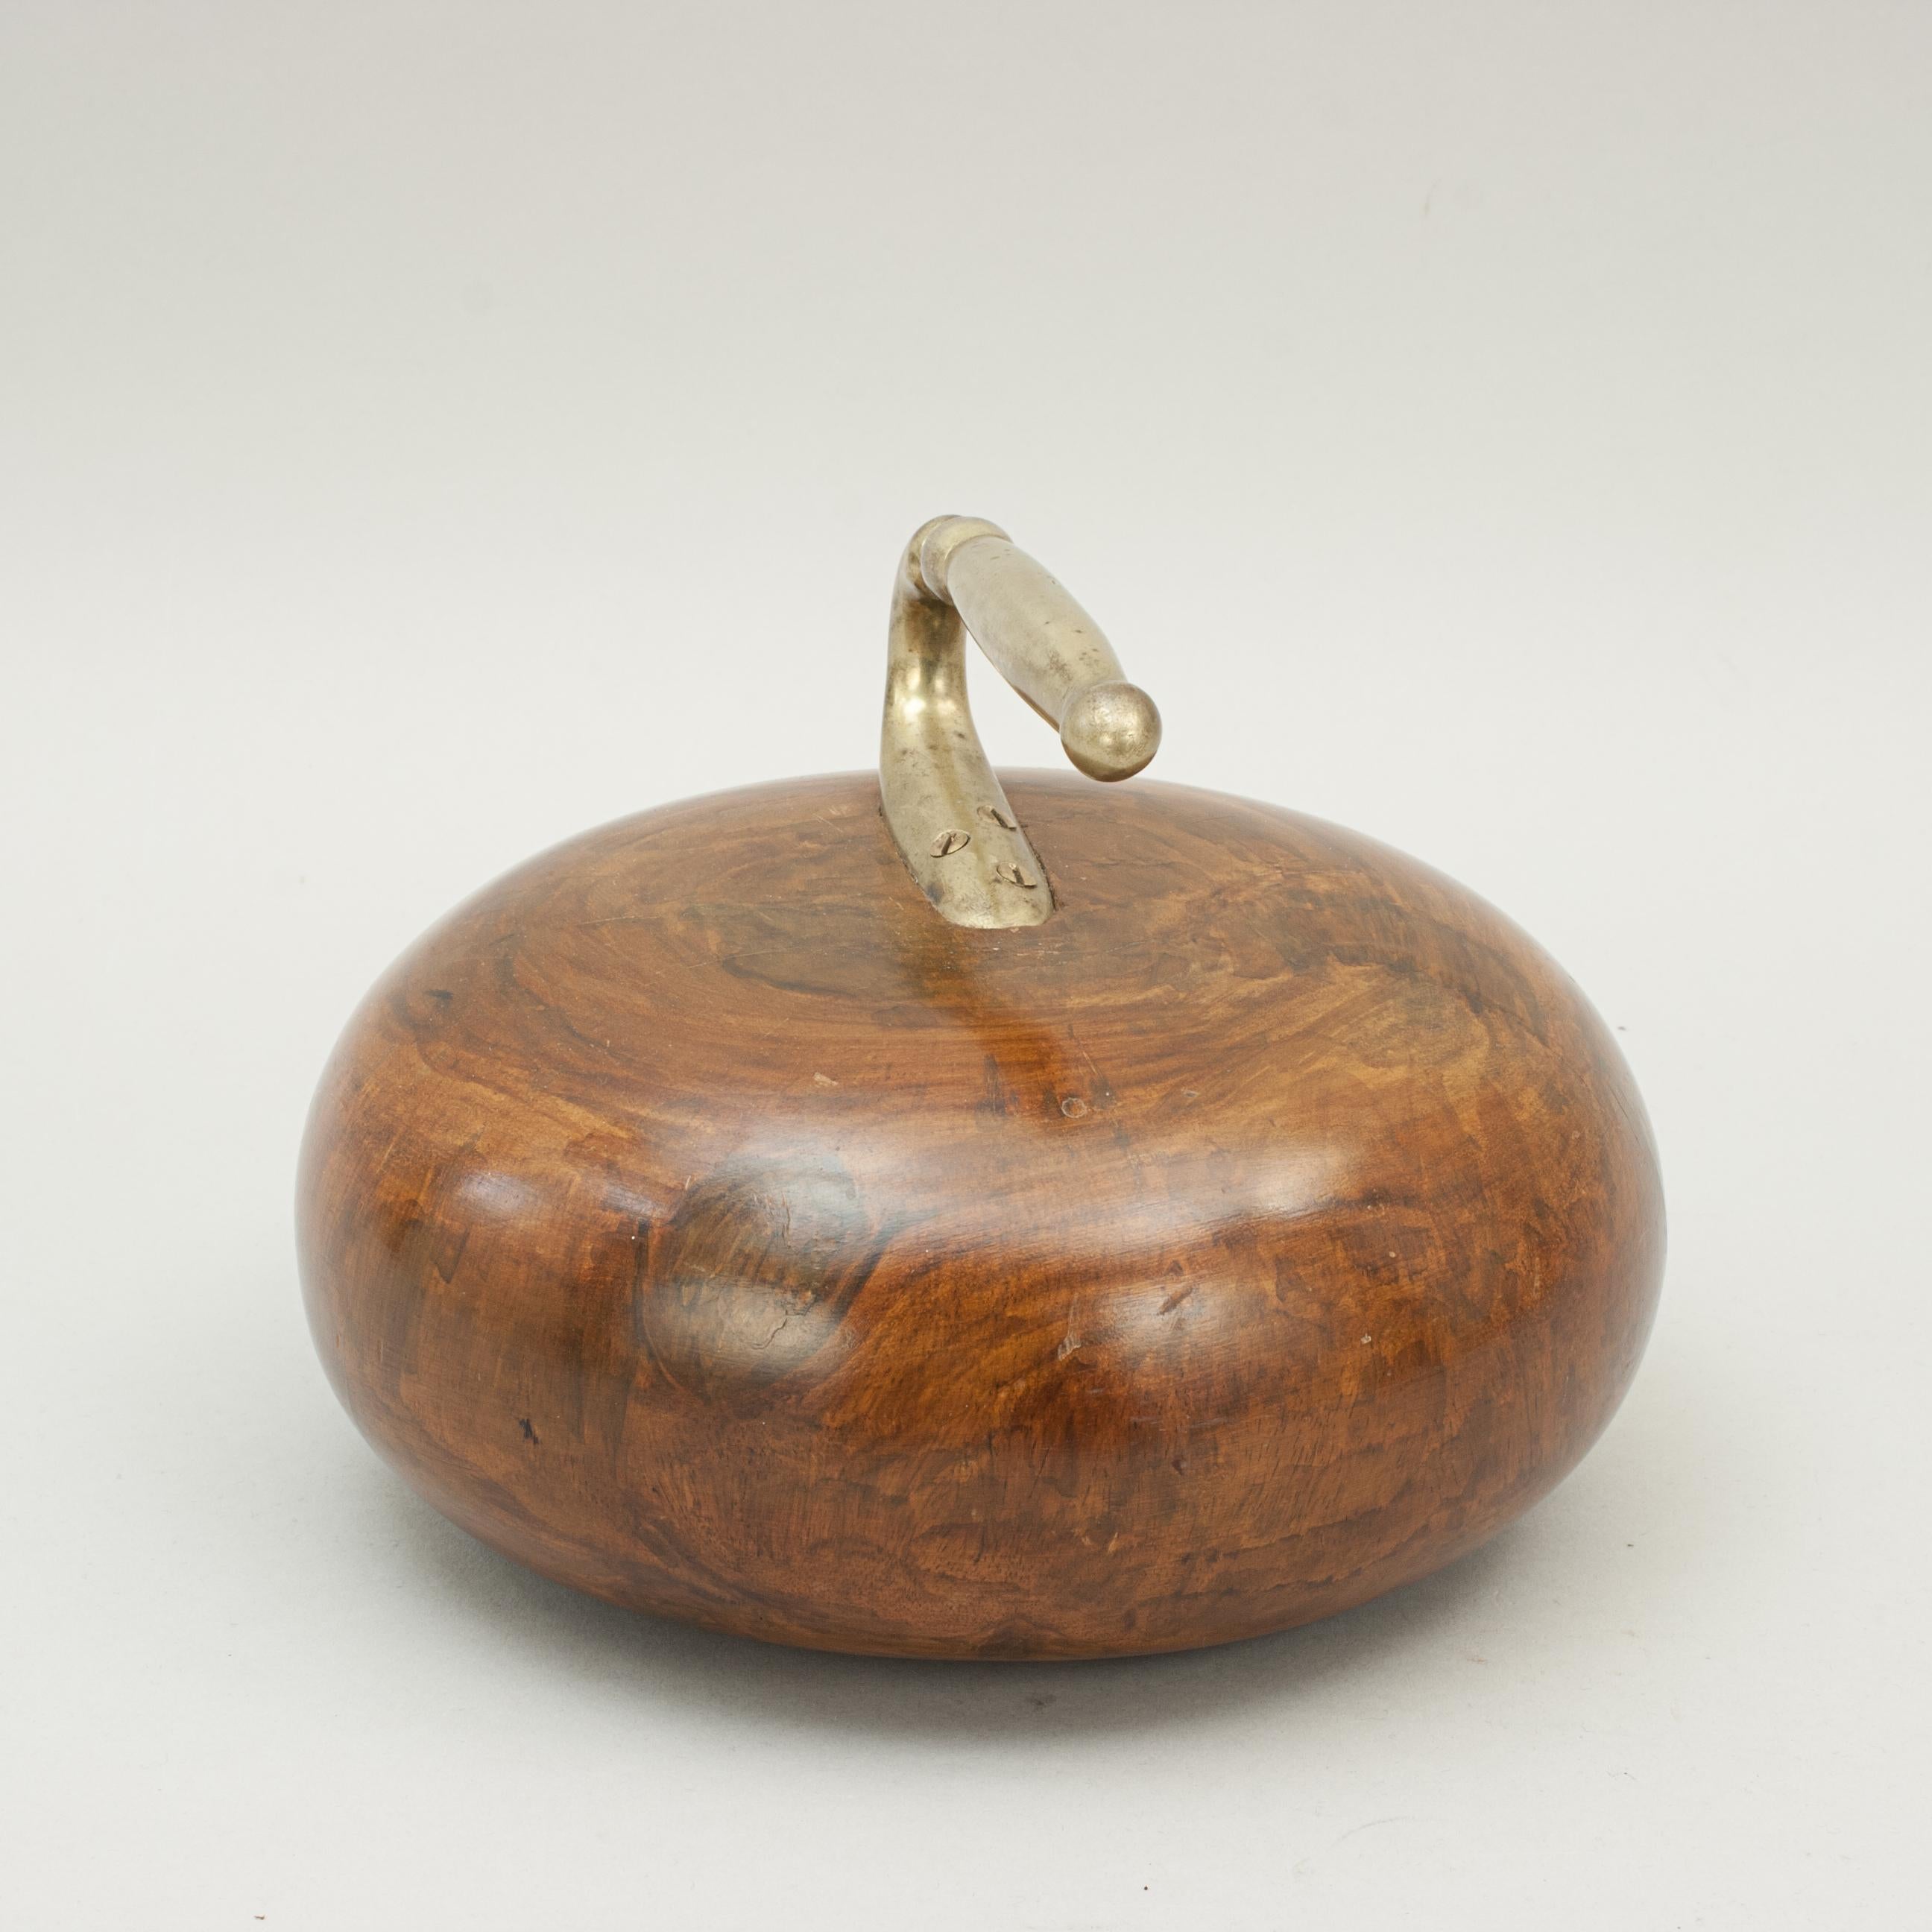 Wooden curling stone.
A nicely turned wooden curling stone with inset brass handle. The wooden curling 'stone' makes a great door stop. The finish has some painted on wood effect on top of the natural wood grain.